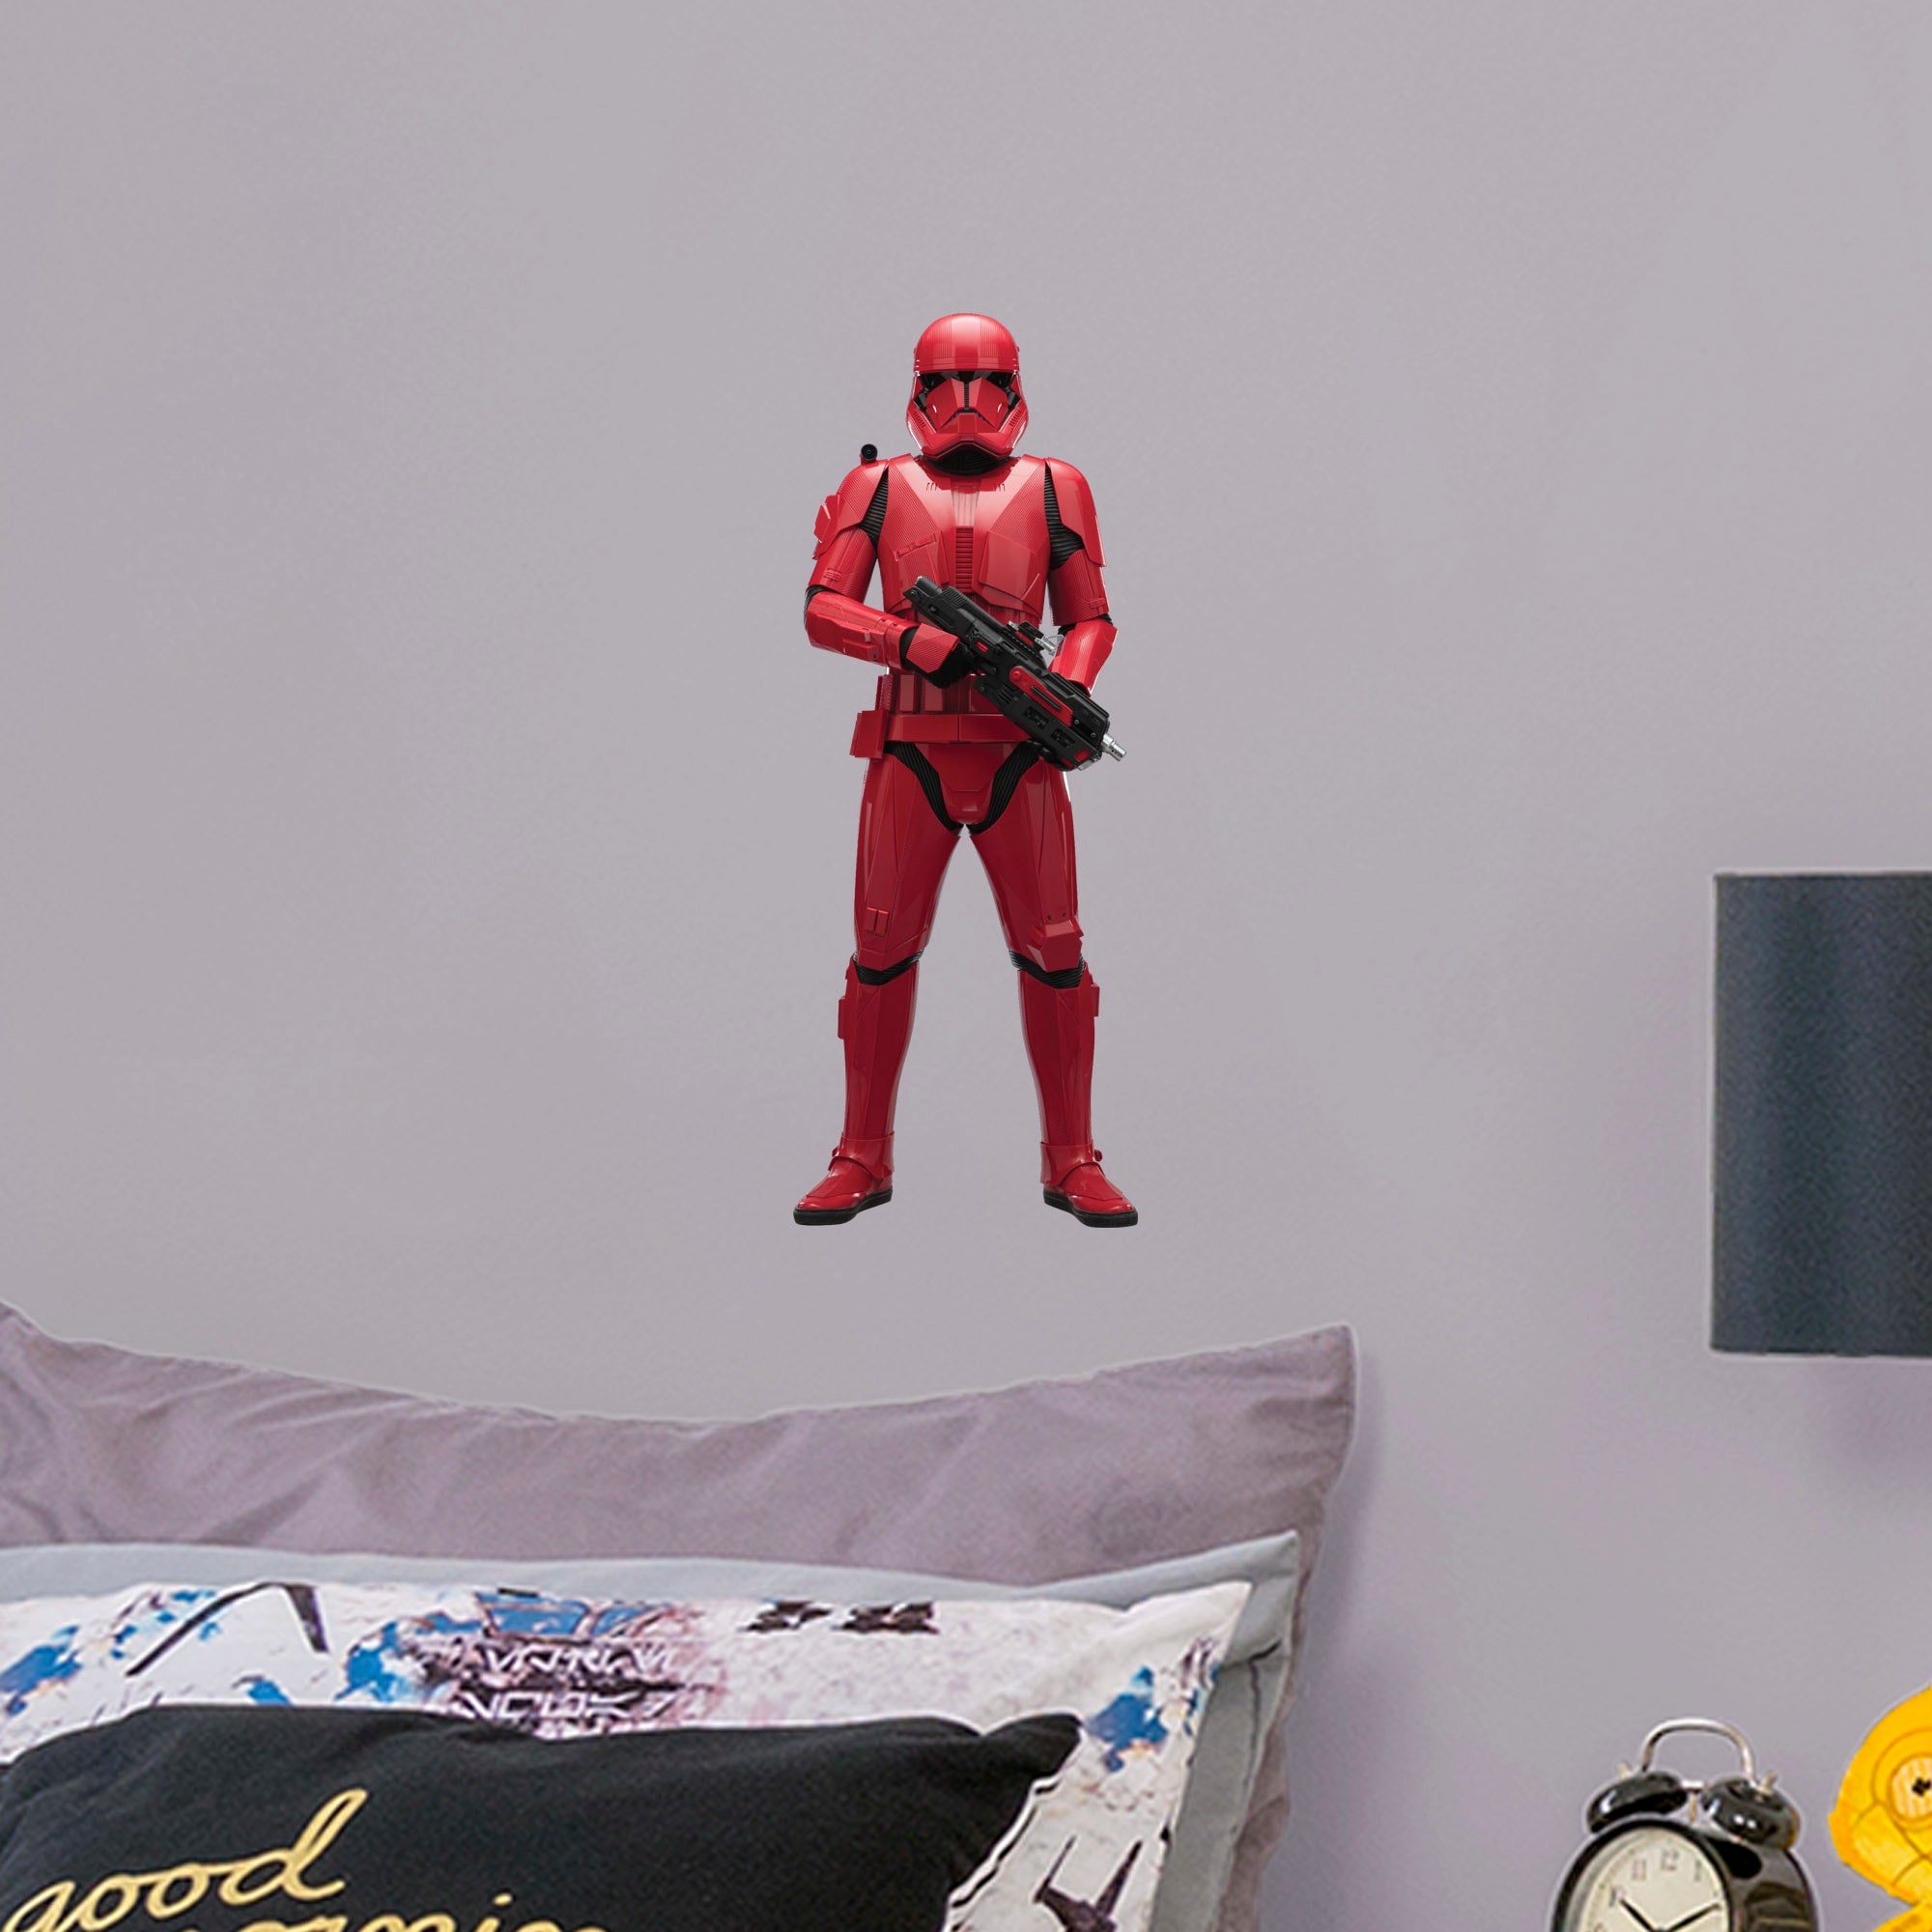 Sith Trooper - Officially Licensed Removable Wall Decal Large by Fathead | Vinyl